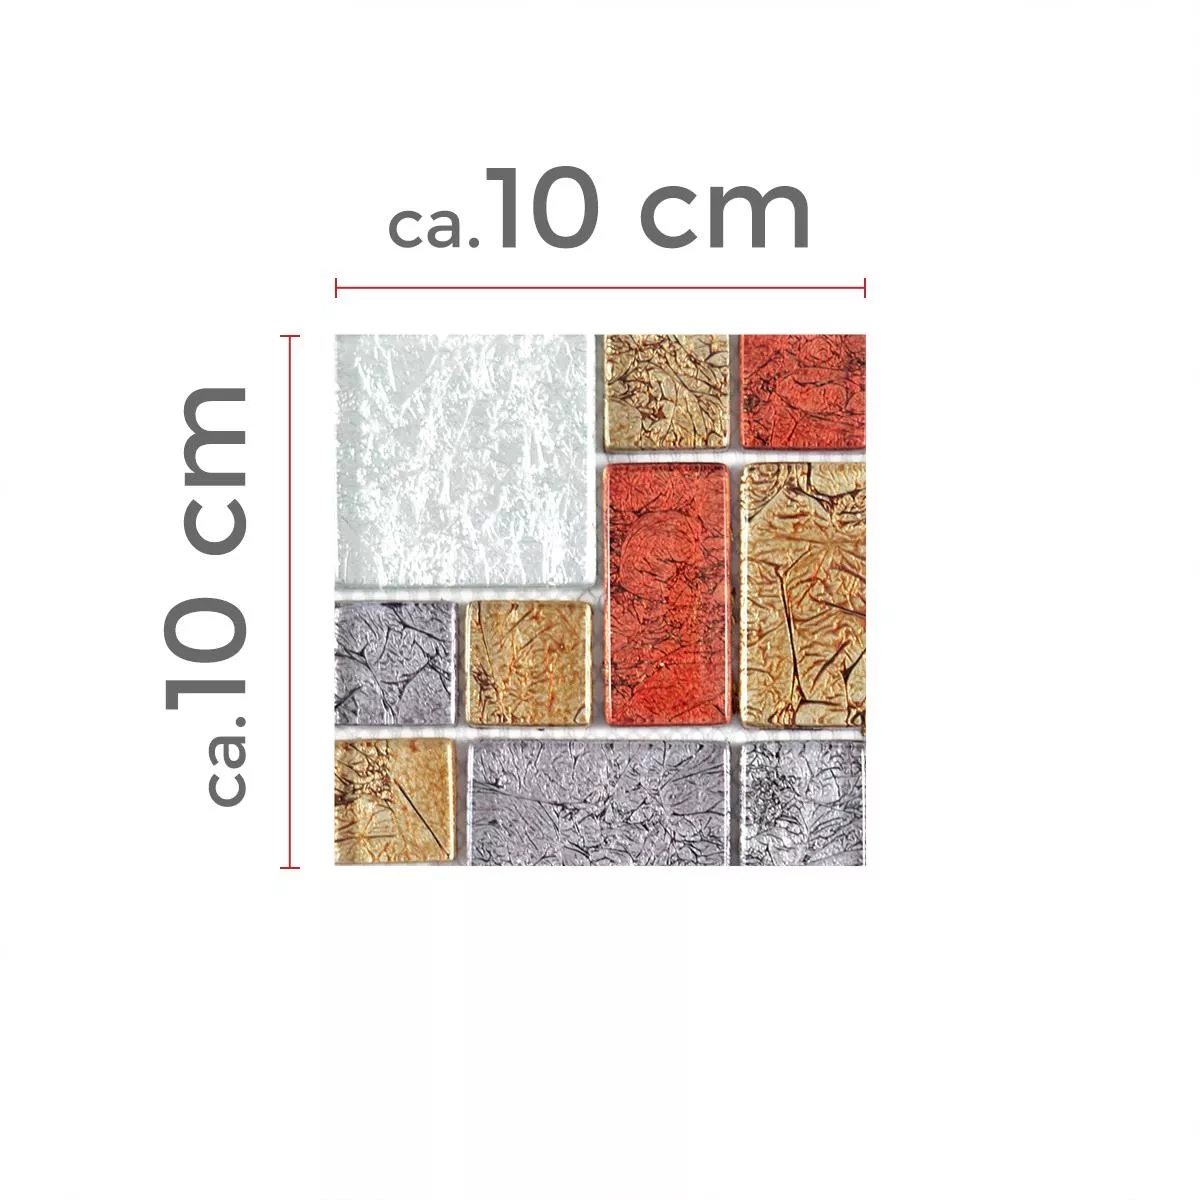 Sample Glass Mosaic Tiles Curlew Red Brown Silver ix